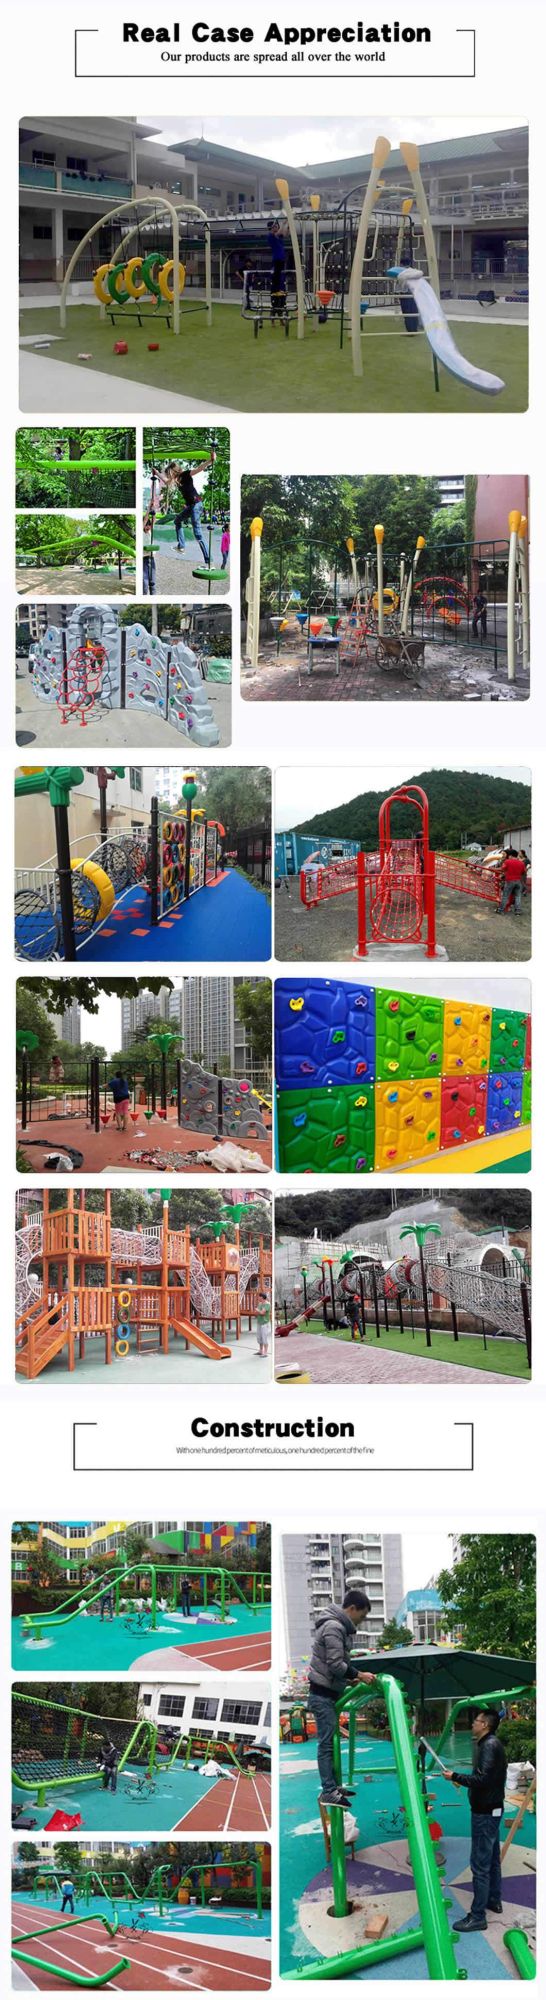 Outdoor with Climb Pipe Rope Net Panel Kids Mini Plastic Climbing Wall Structure Suppliers